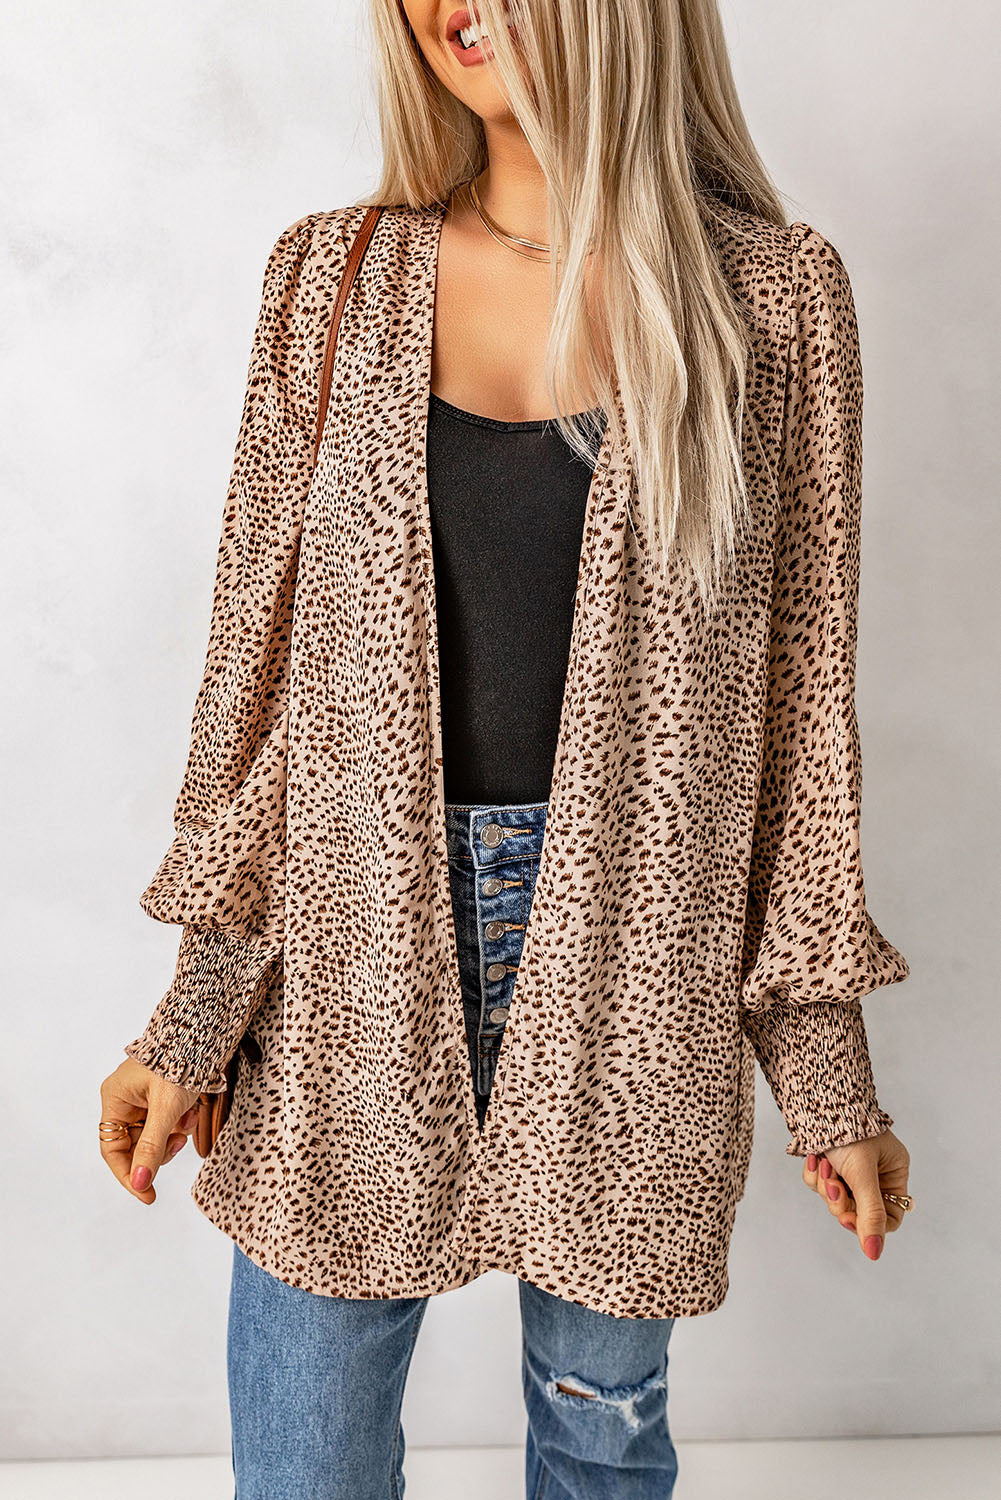 Leopard Print Balloon Sleeve Cardigan - Beige / S - Women’s Clothing & Accessories - Shirts & Tops - 1 - 2024